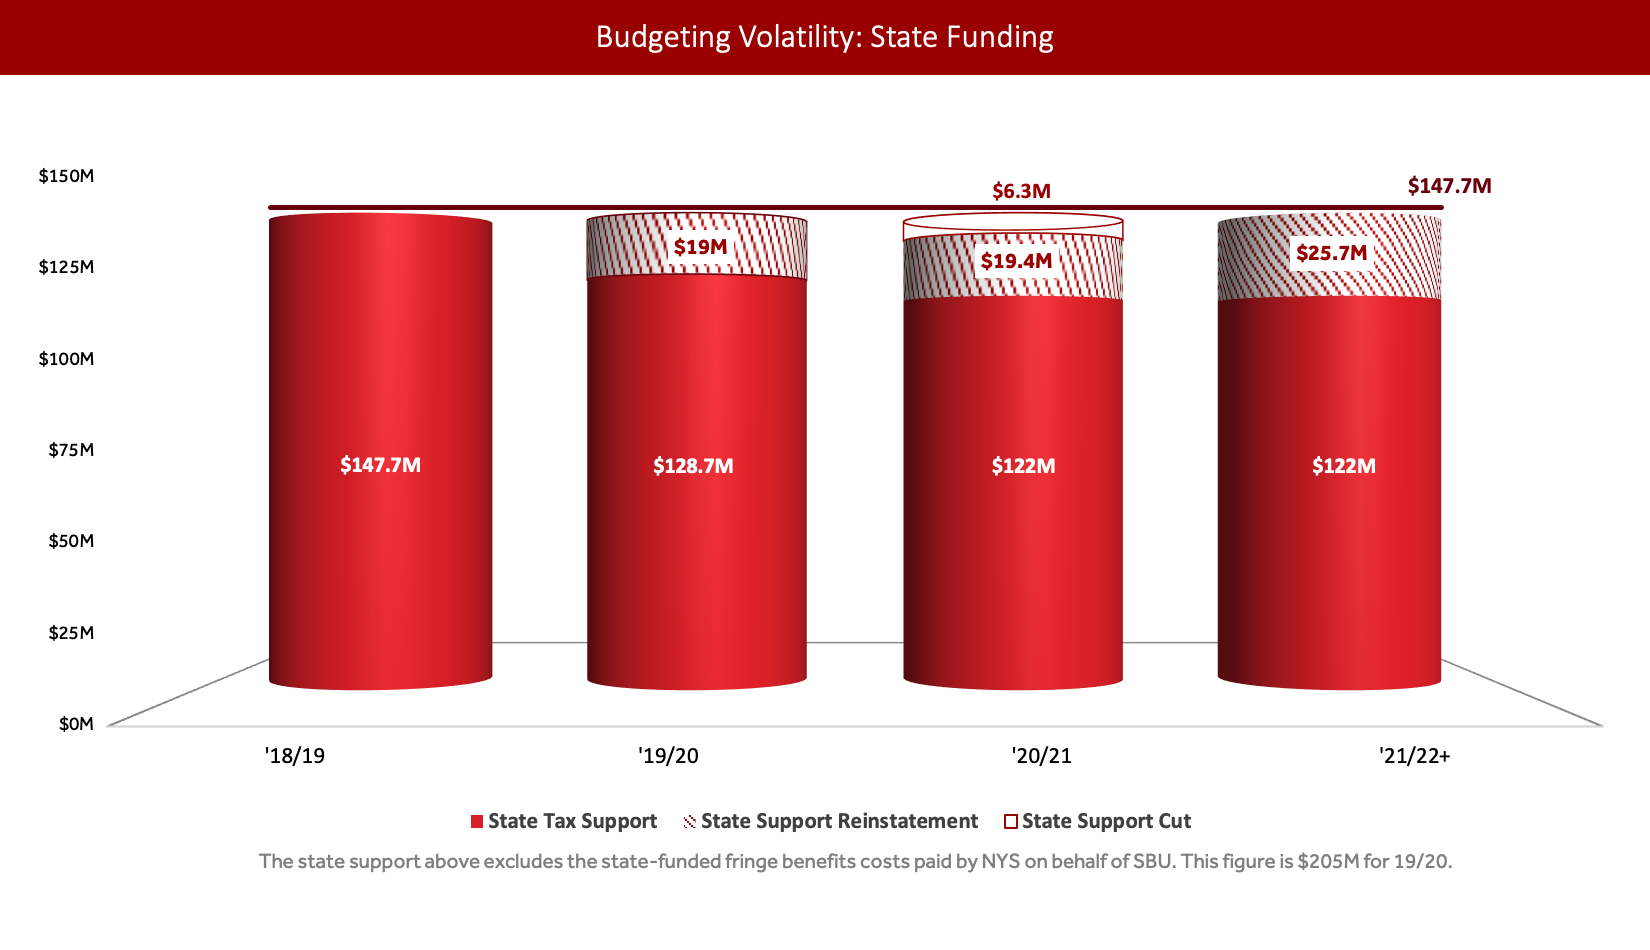 Budgeting volatility for state funding, chart shows state tax support compared to state support reinstatement and state support cuts for the years 2018 through 2022